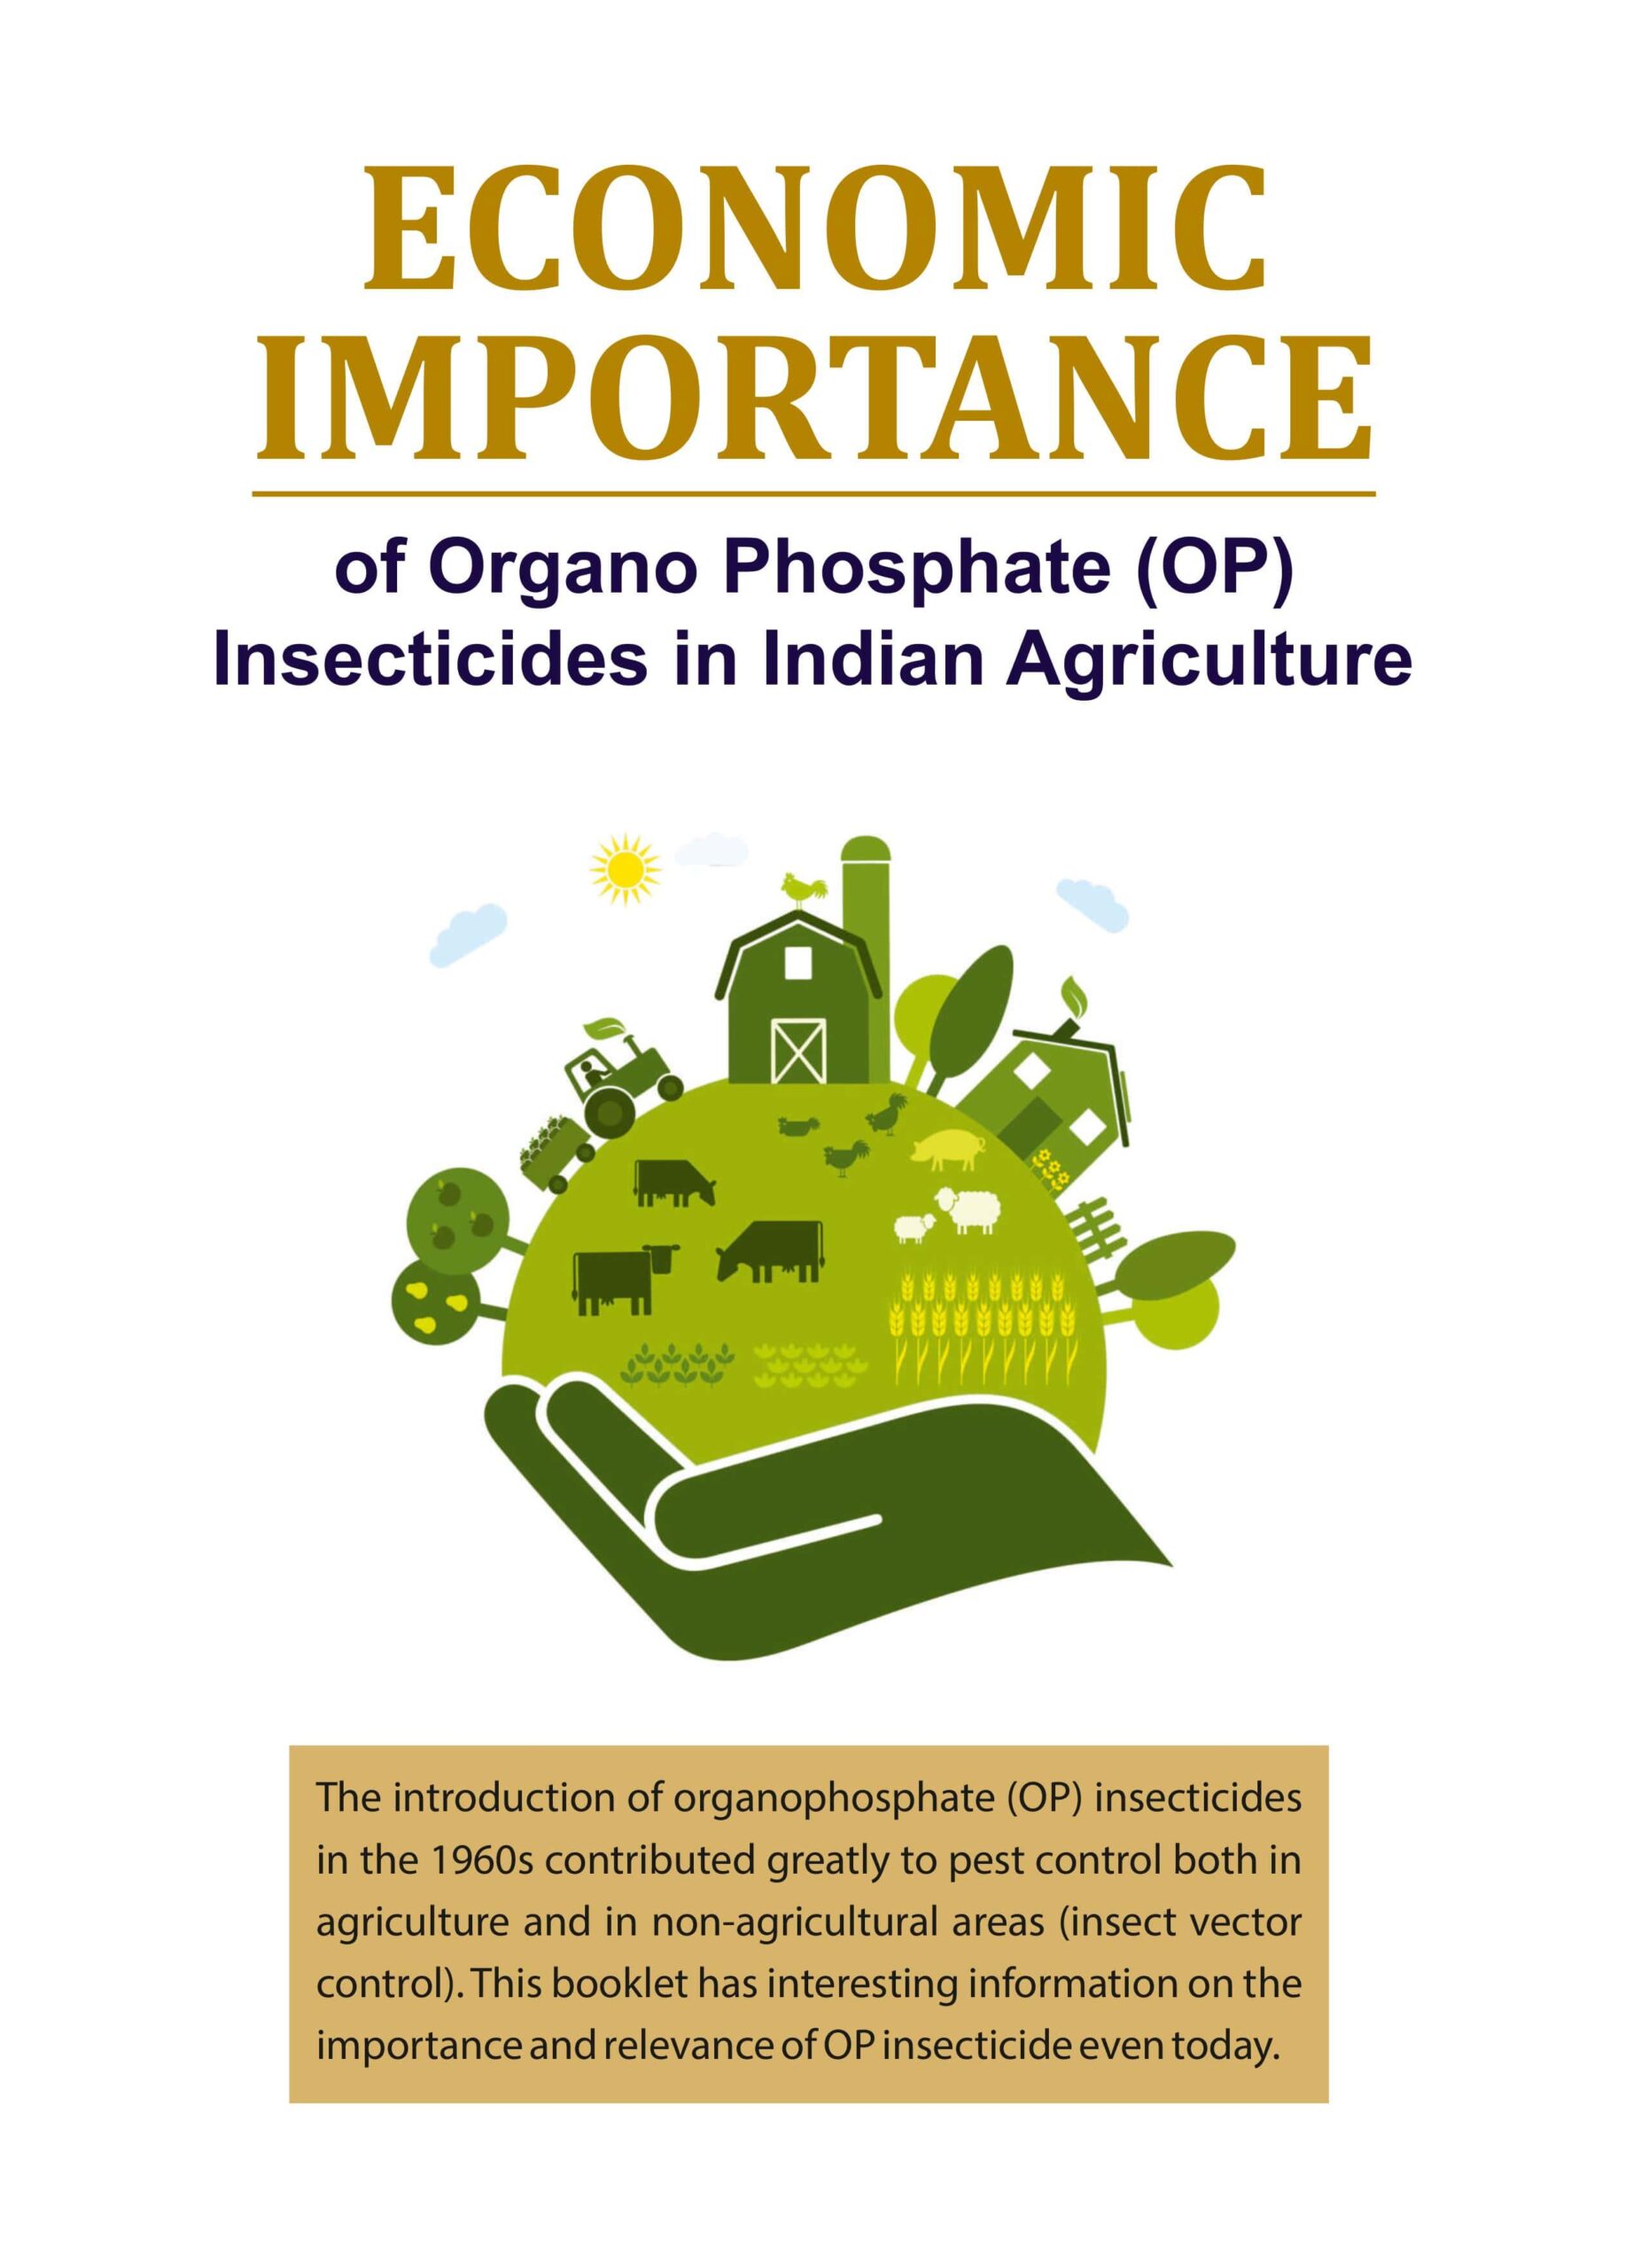 Economic Importance of OP Insecticides in Indian agriculture